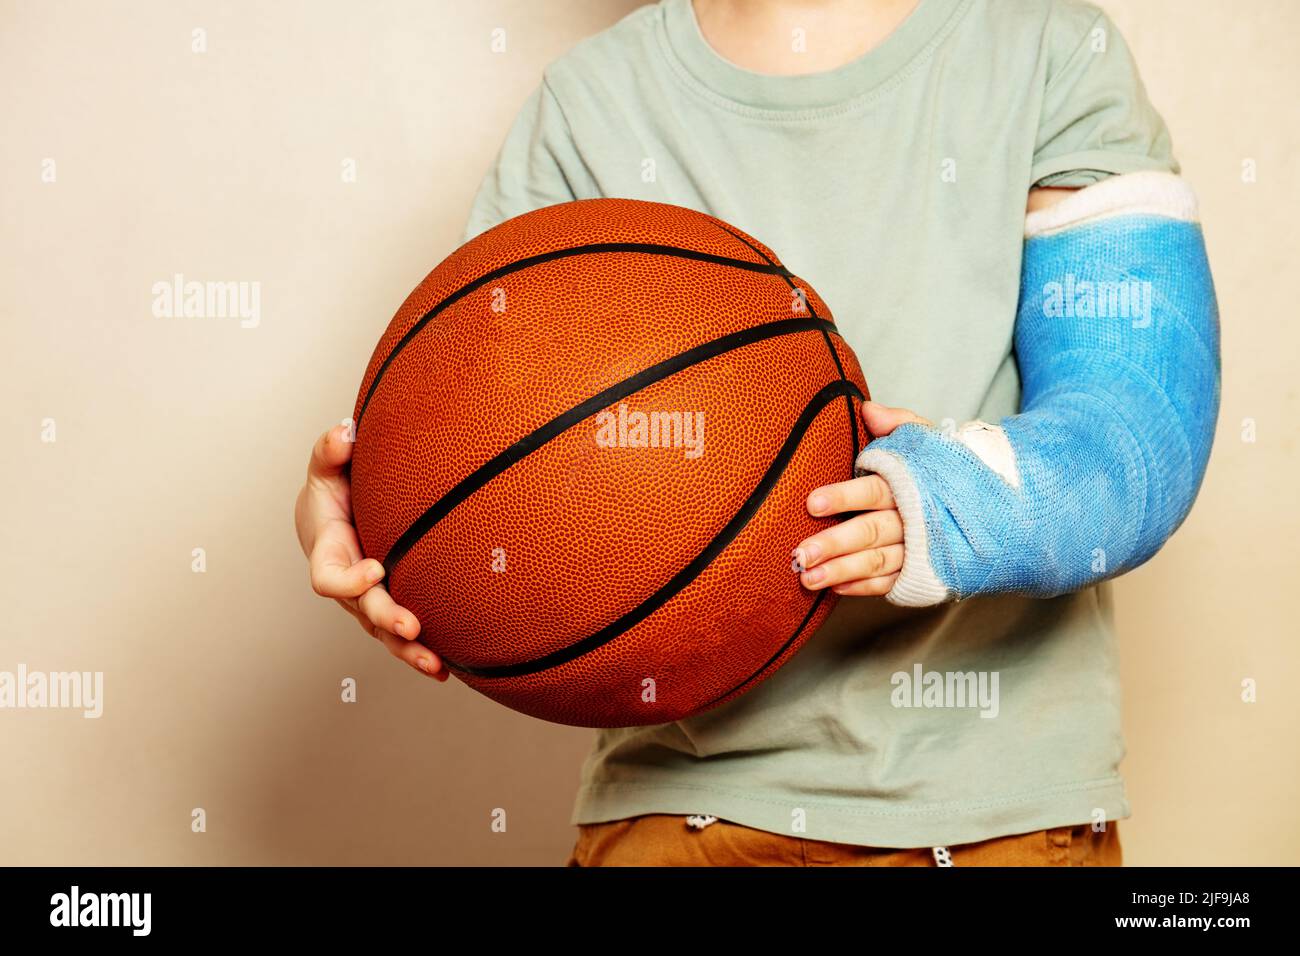 Big basketball ball in hands of boy with broken hand cast Stock Photo